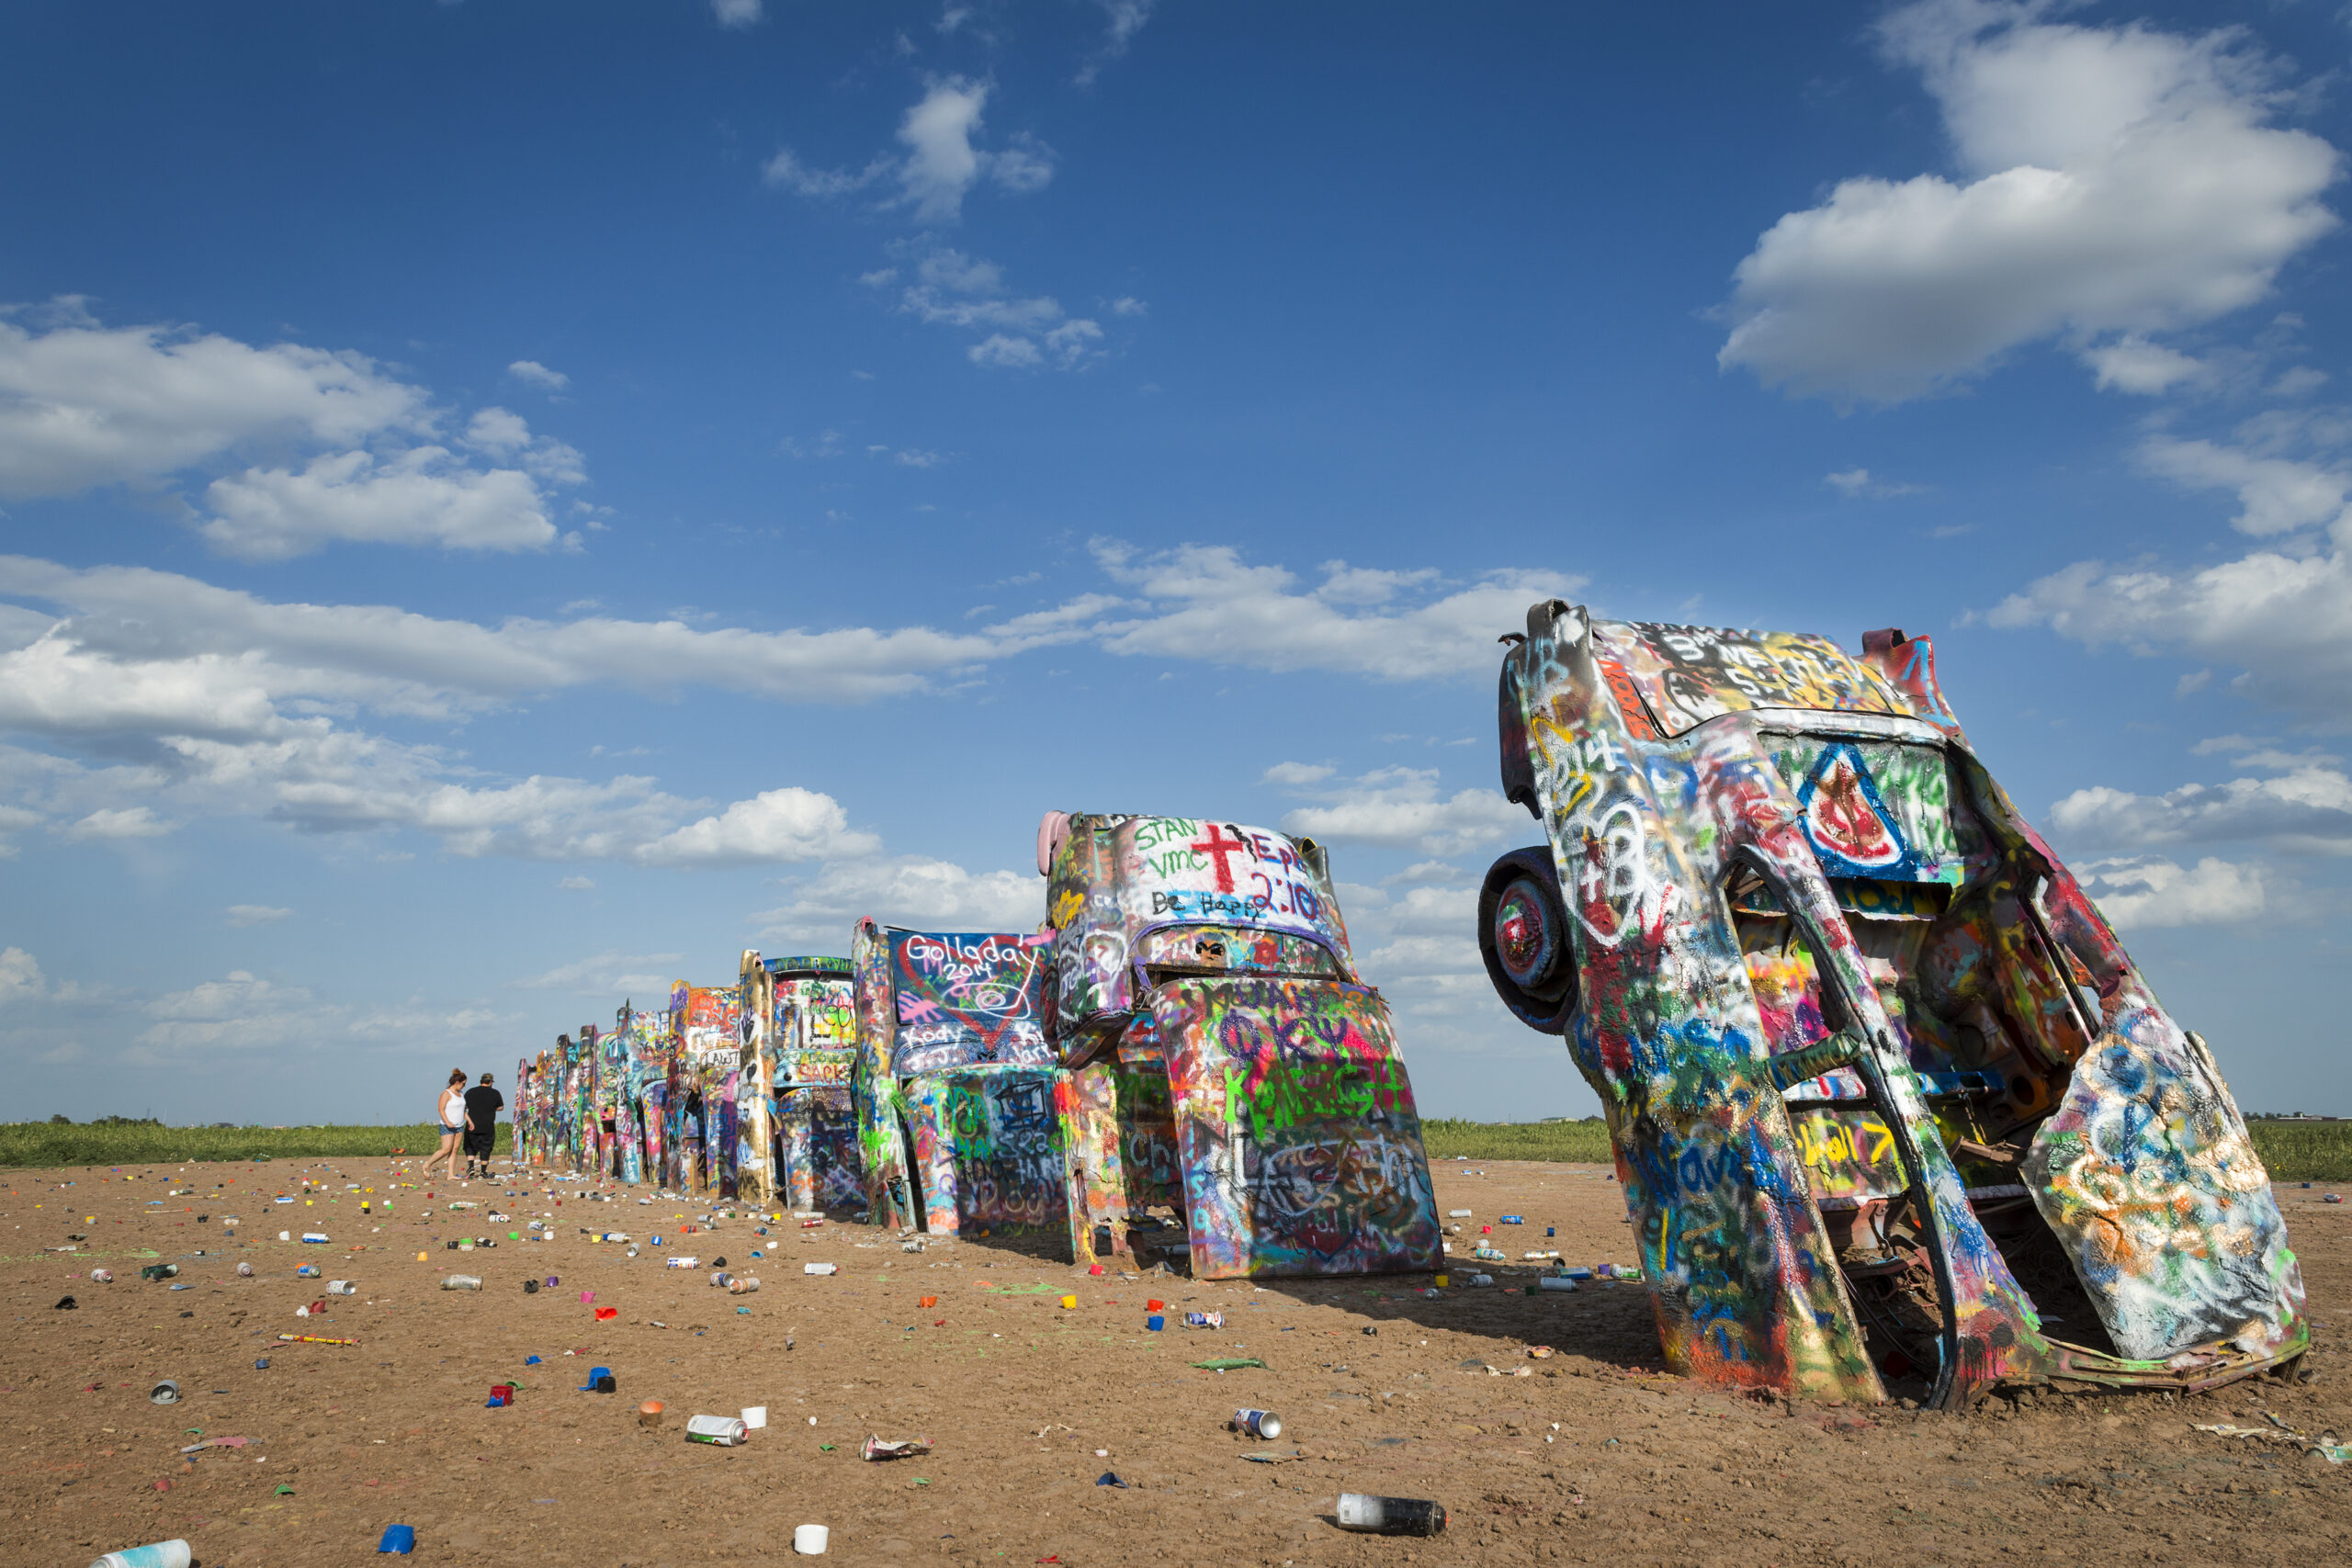 Amarillo, Texas - July 8, 2014: Row of brightly painted Cadillacs in the Cadillac Ranch in Amarillo, Texas, USA.